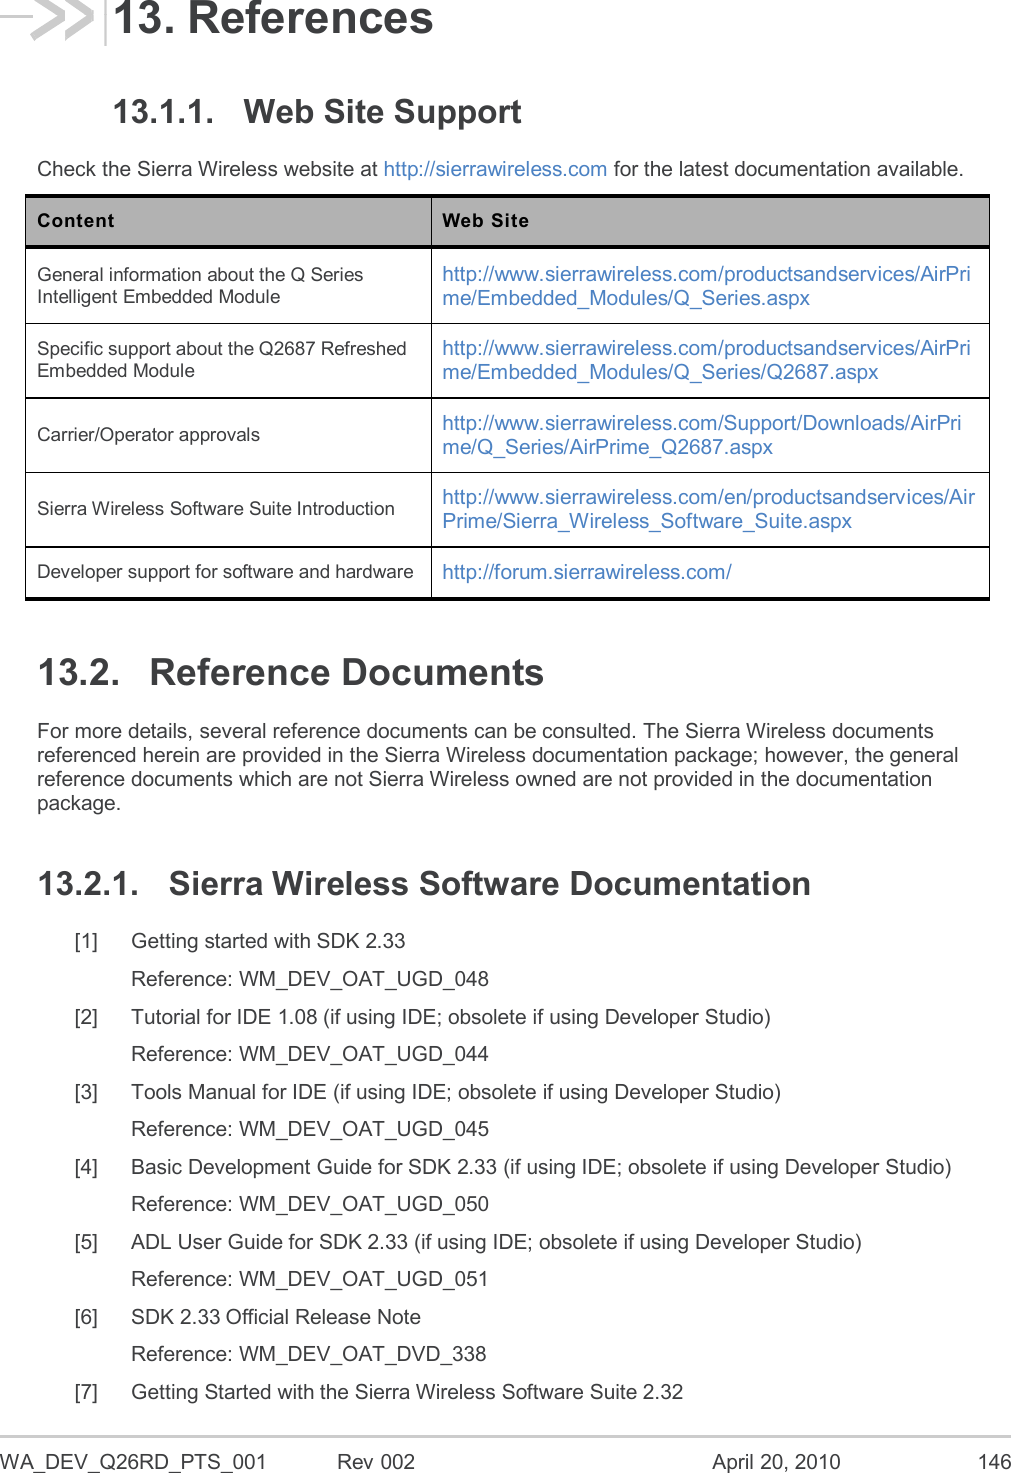  WA_DEV_Q26RD_PTS_001  Rev 002  April 20, 2010 146 13. References 13.1.1.  Web Site Support Check the Sierra Wireless website at http://sierrawireless.com for the latest documentation available. Content Web Site General information about the Q Series Intelligent Embedded Module http://www.sierrawireless.com/productsandservices/AirPrime/Embedded_Modules/Q_Series.aspx Specific support about the Q2687 Refreshed Embedded Module http://www.sierrawireless.com/productsandservices/AirPrime/Embedded_Modules/Q_Series/Q2687.aspx Carrier/Operator approvals http://www.sierrawireless.com/Support/Downloads/AirPrime/Q_Series/AirPrime_Q2687.aspx Sierra Wireless Software Suite Introduction http://www.sierrawireless.com/en/productsandservices/AirPrime/Sierra_Wireless_Software_Suite.aspx Developer support for software and hardware http://forum.sierrawireless.com/ 13.2.  Reference Documents For more details, several reference documents can be consulted. The Sierra Wireless documents referenced herein are provided in the Sierra Wireless documentation package; however, the general reference documents which are not Sierra Wireless owned are not provided in the documentation package. 13.2.1.  Sierra Wireless Software Documentation [1]  Getting started with SDK 2.33 Reference: WM_DEV_OAT_UGD_048 [2]  Tutorial for IDE 1.08 (if using IDE; obsolete if using Developer Studio) Reference: WM_DEV_OAT_UGD_044 [3]  Tools Manual for IDE (if using IDE; obsolete if using Developer Studio) Reference: WM_DEV_OAT_UGD_045 [4]  Basic Development Guide for SDK 2.33 (if using IDE; obsolete if using Developer Studio) Reference: WM_DEV_OAT_UGD_050 [5]  ADL User Guide for SDK 2.33 (if using IDE; obsolete if using Developer Studio) Reference: WM_DEV_OAT_UGD_051 [6]  SDK 2.33 Official Release Note Reference: WM_DEV_OAT_DVD_338 [7]  Getting Started with the Sierra Wireless Software Suite 2.32 